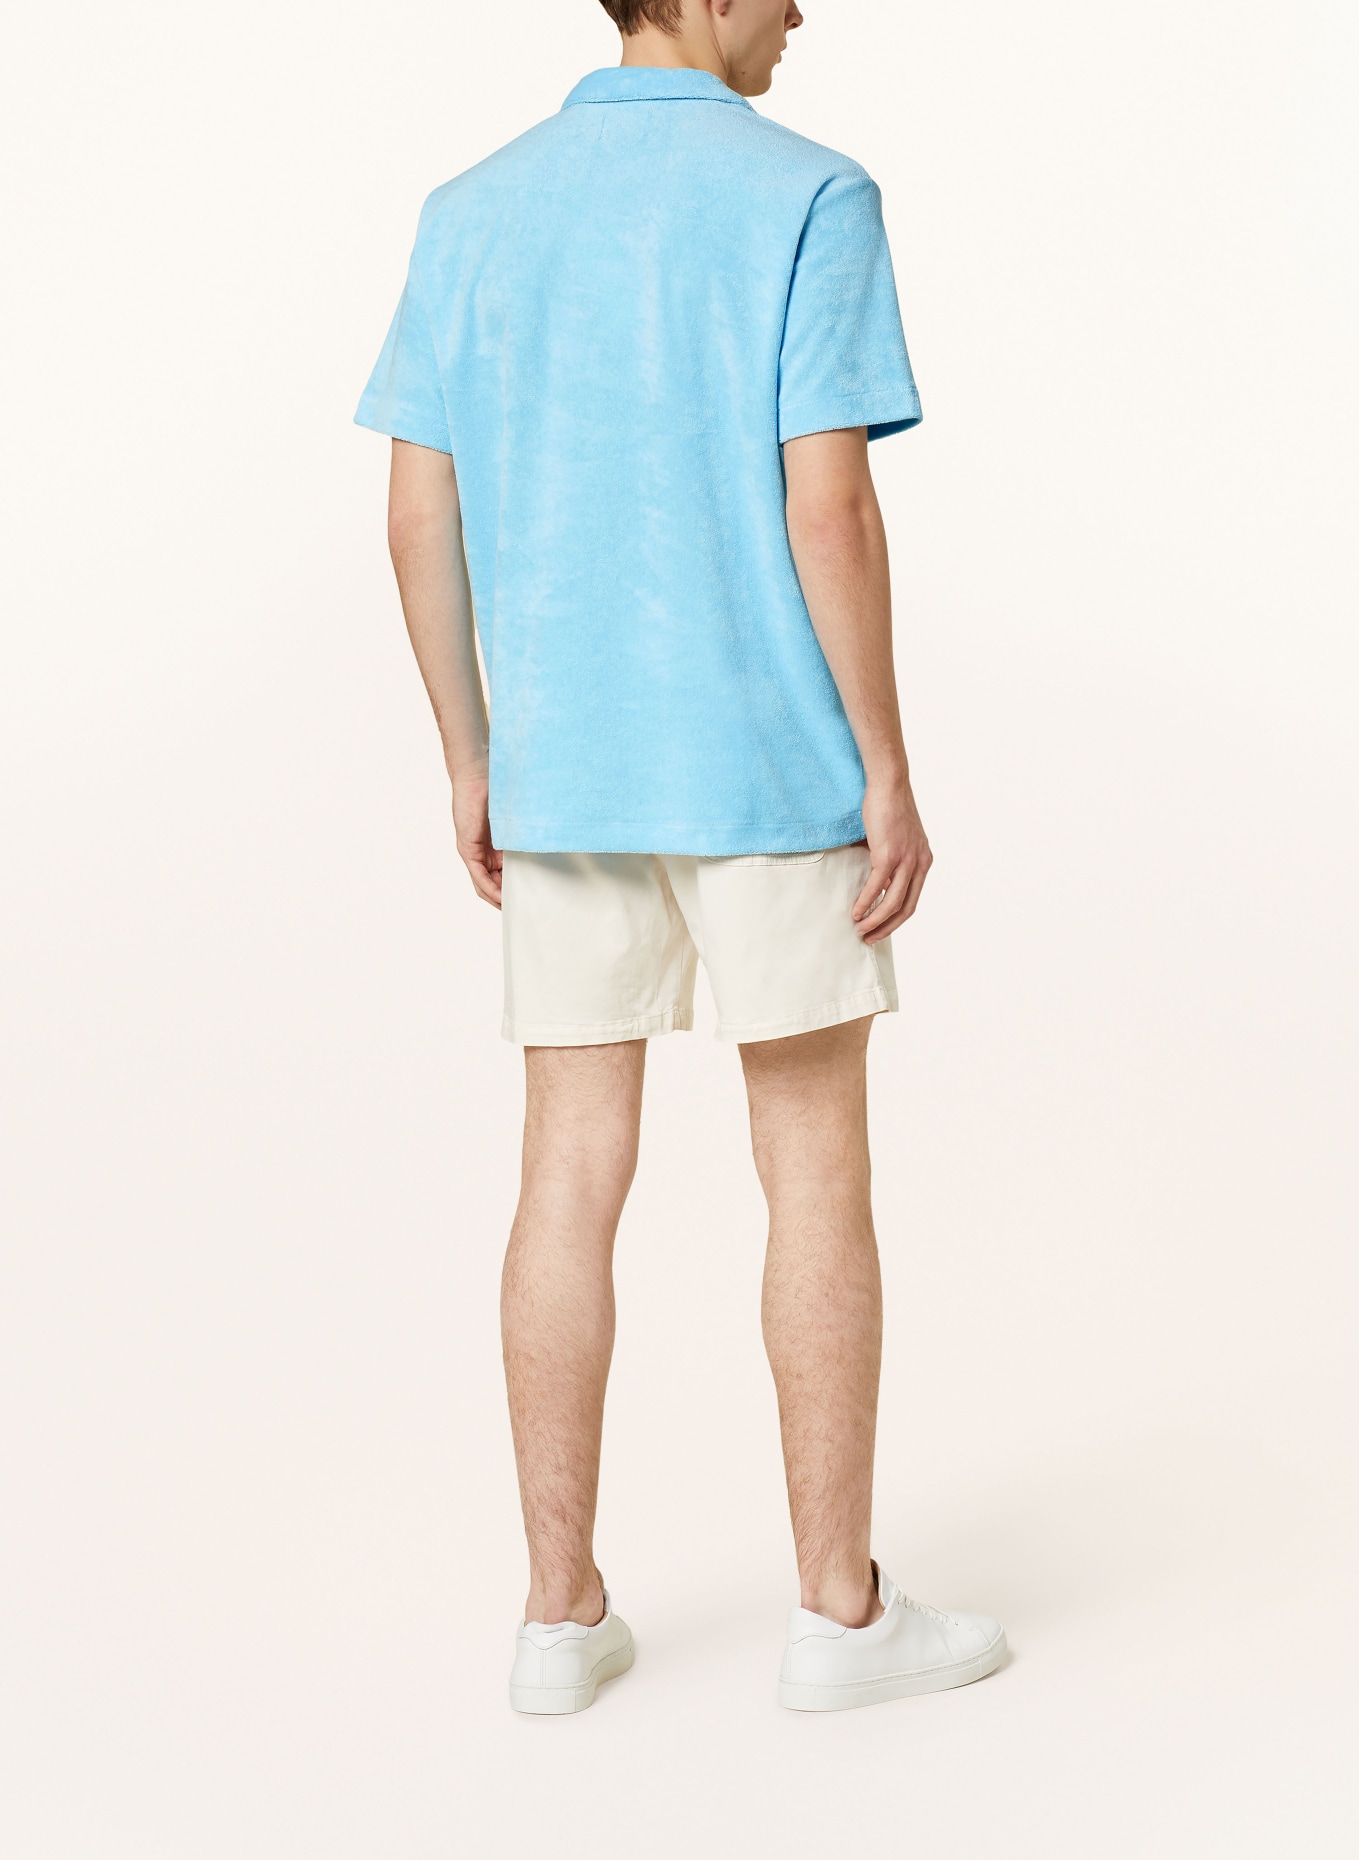 SCOTCH & SODA Resort shirt SOLID comfort fit in terry cloth, Color: TURQUOISE (Image 3)